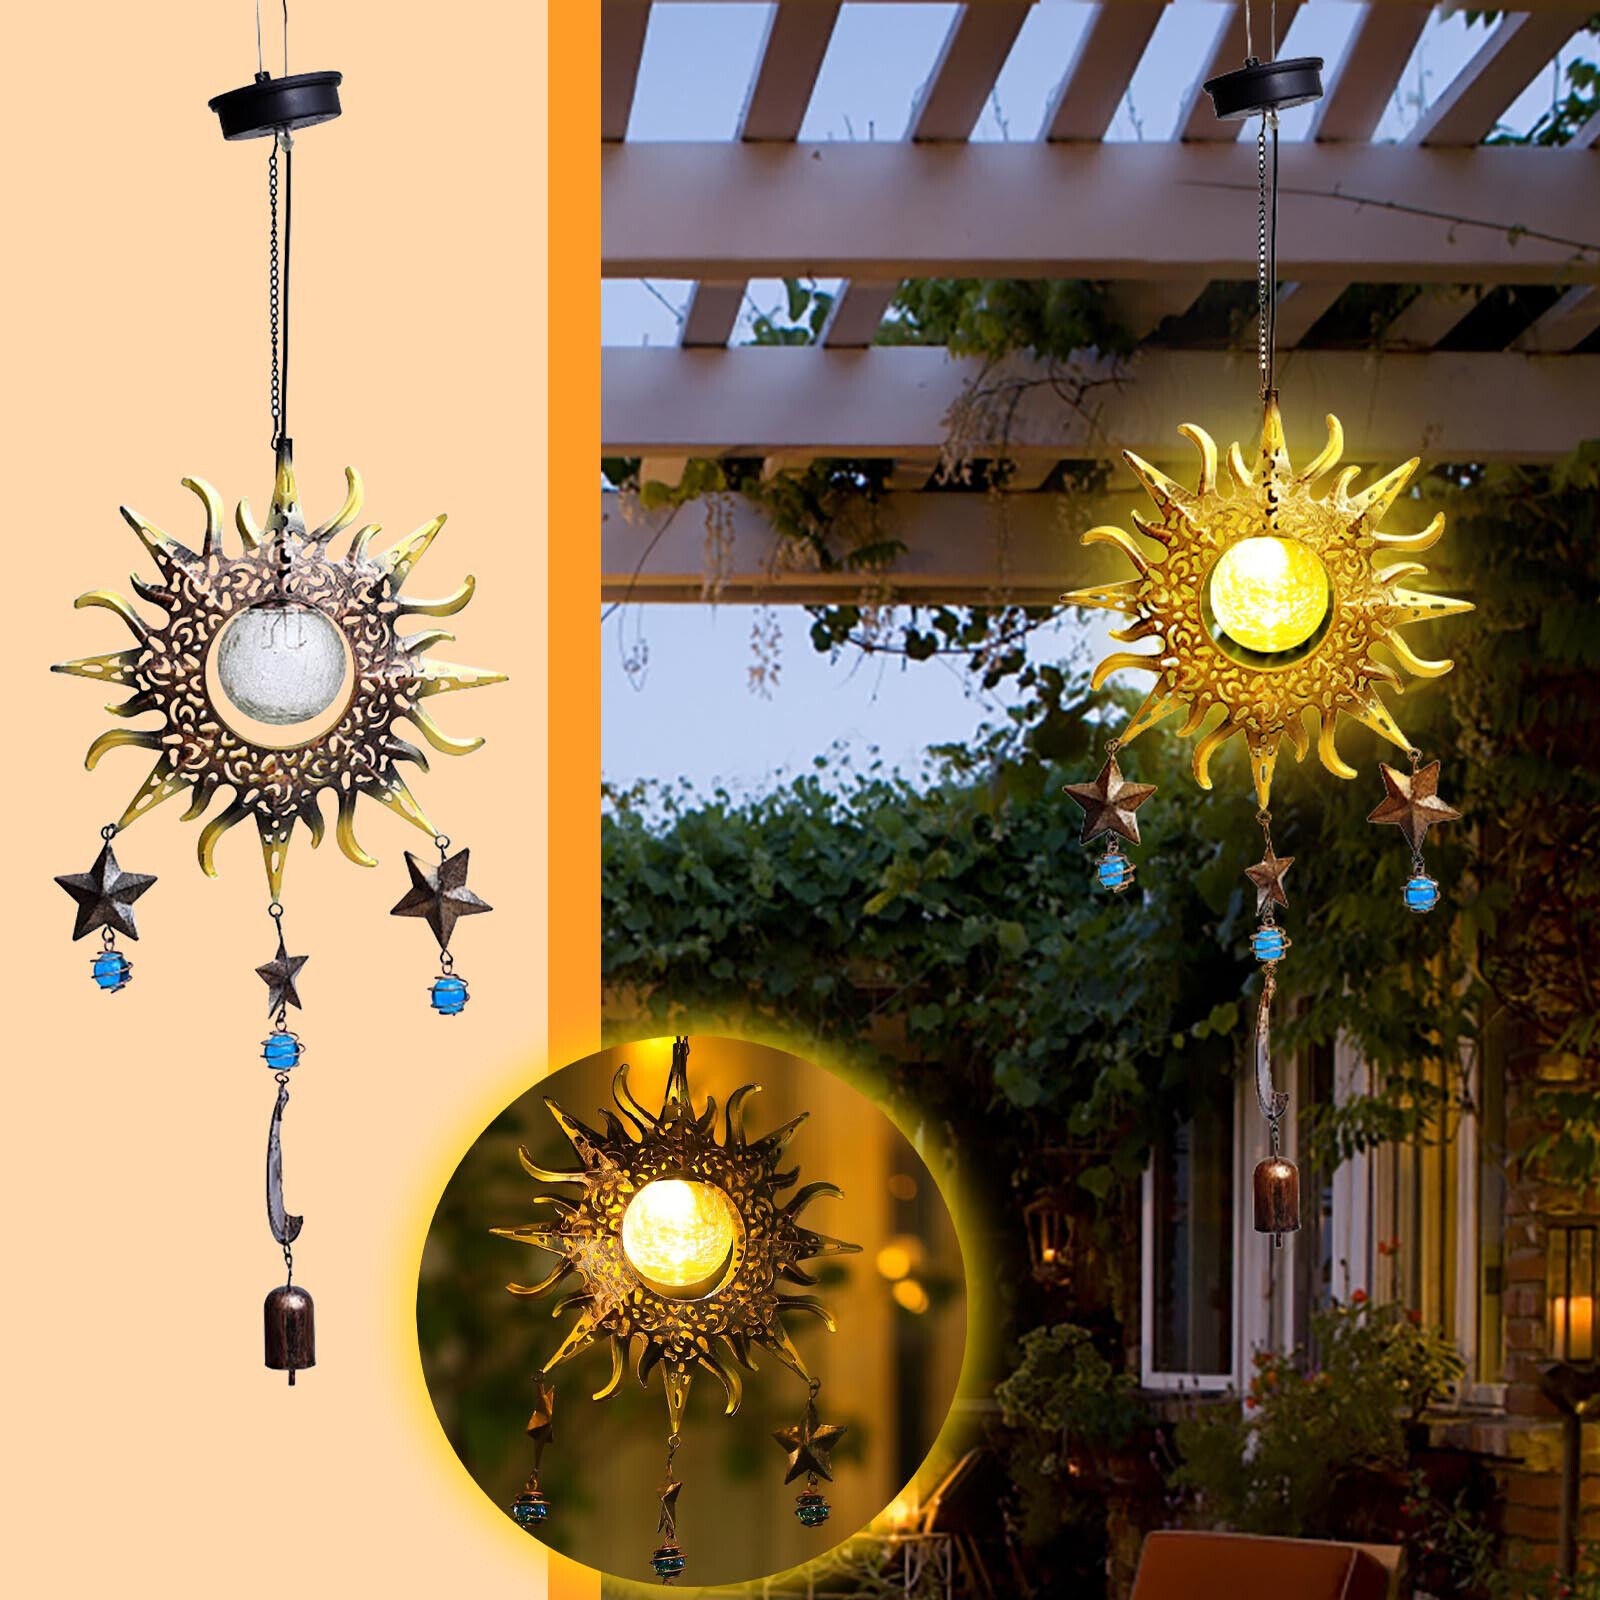 🎇New Arrival - LED Waterproof Solar Wind Chime